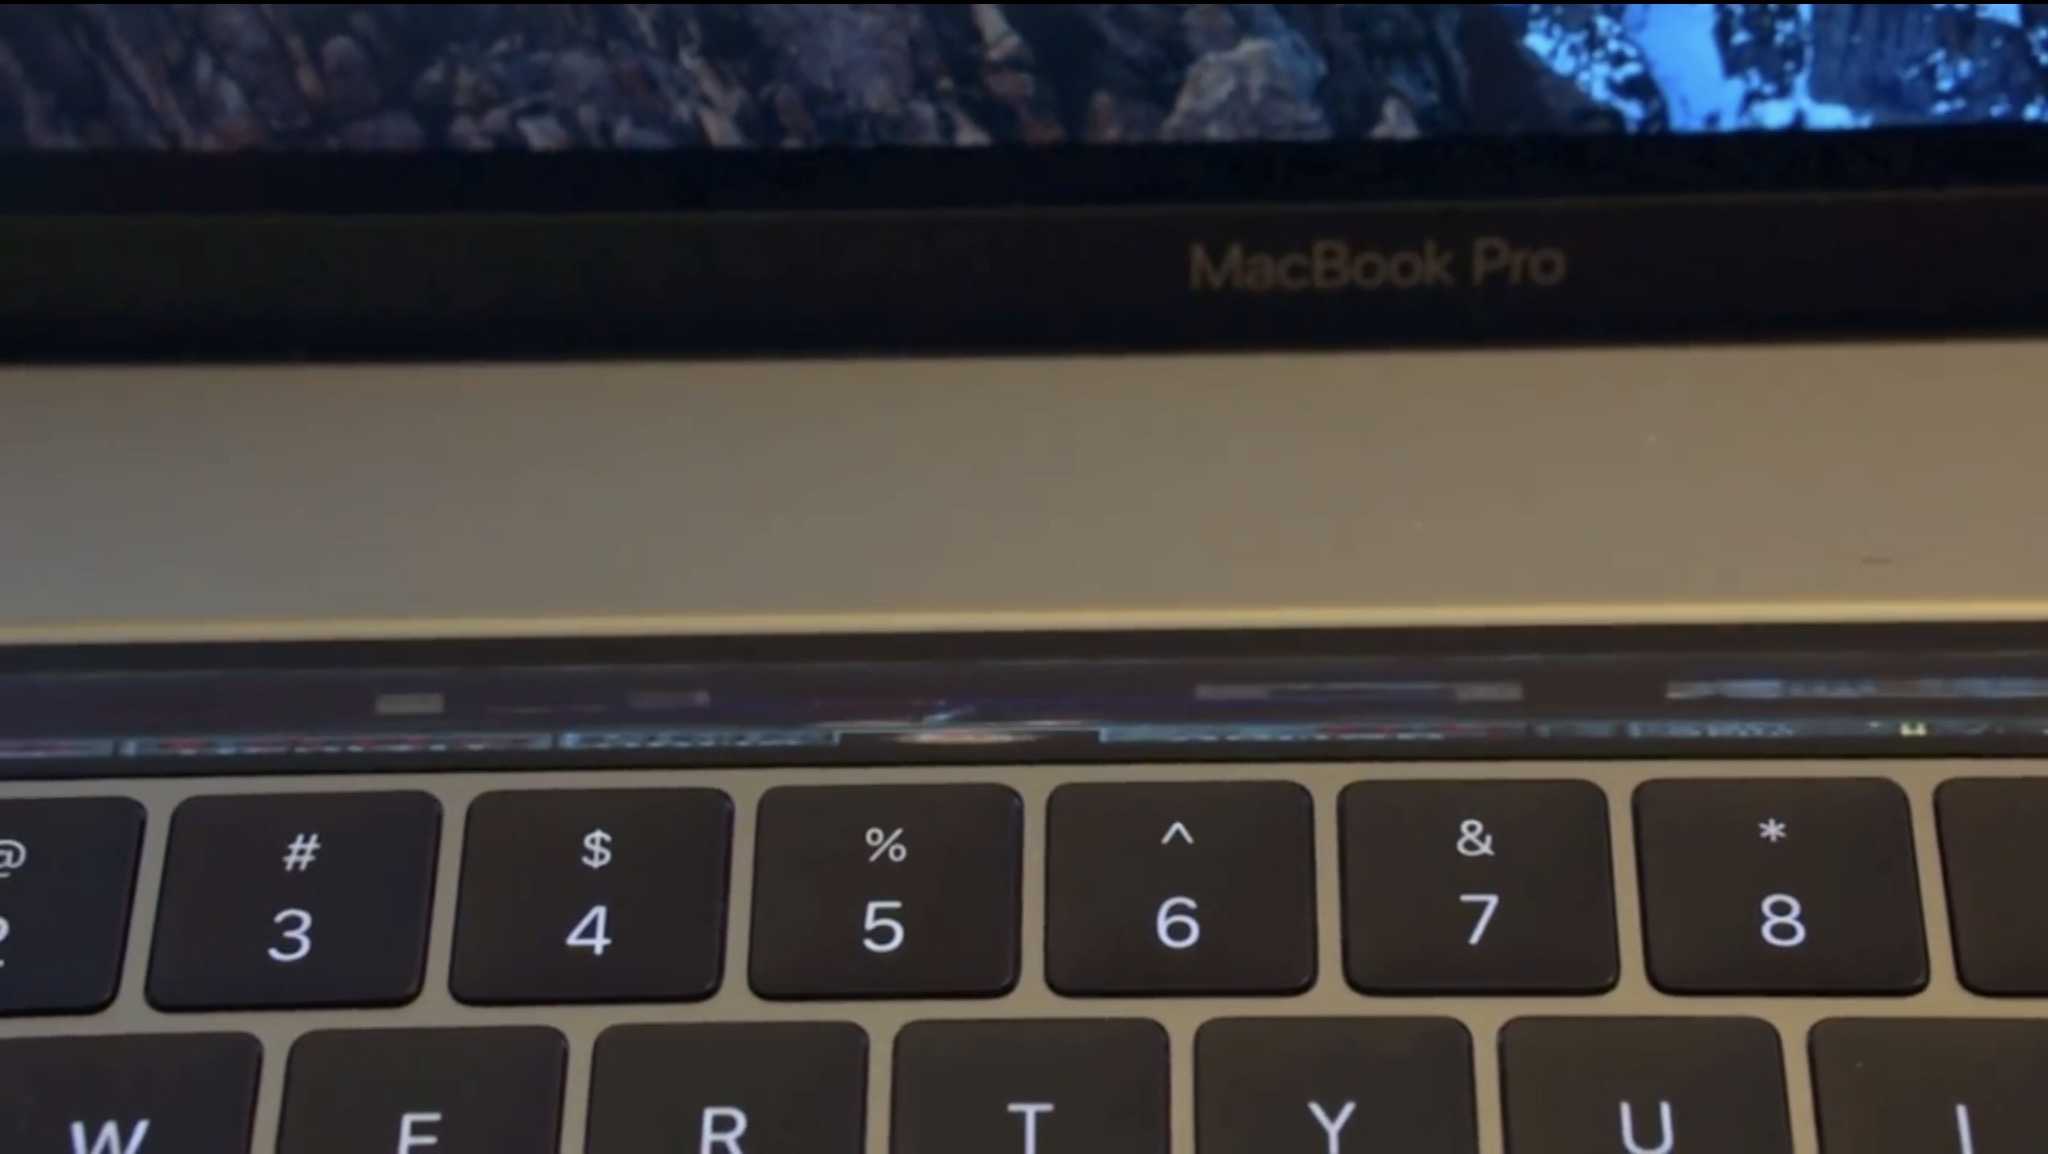 You can now play DOOM on the Touch Bar.